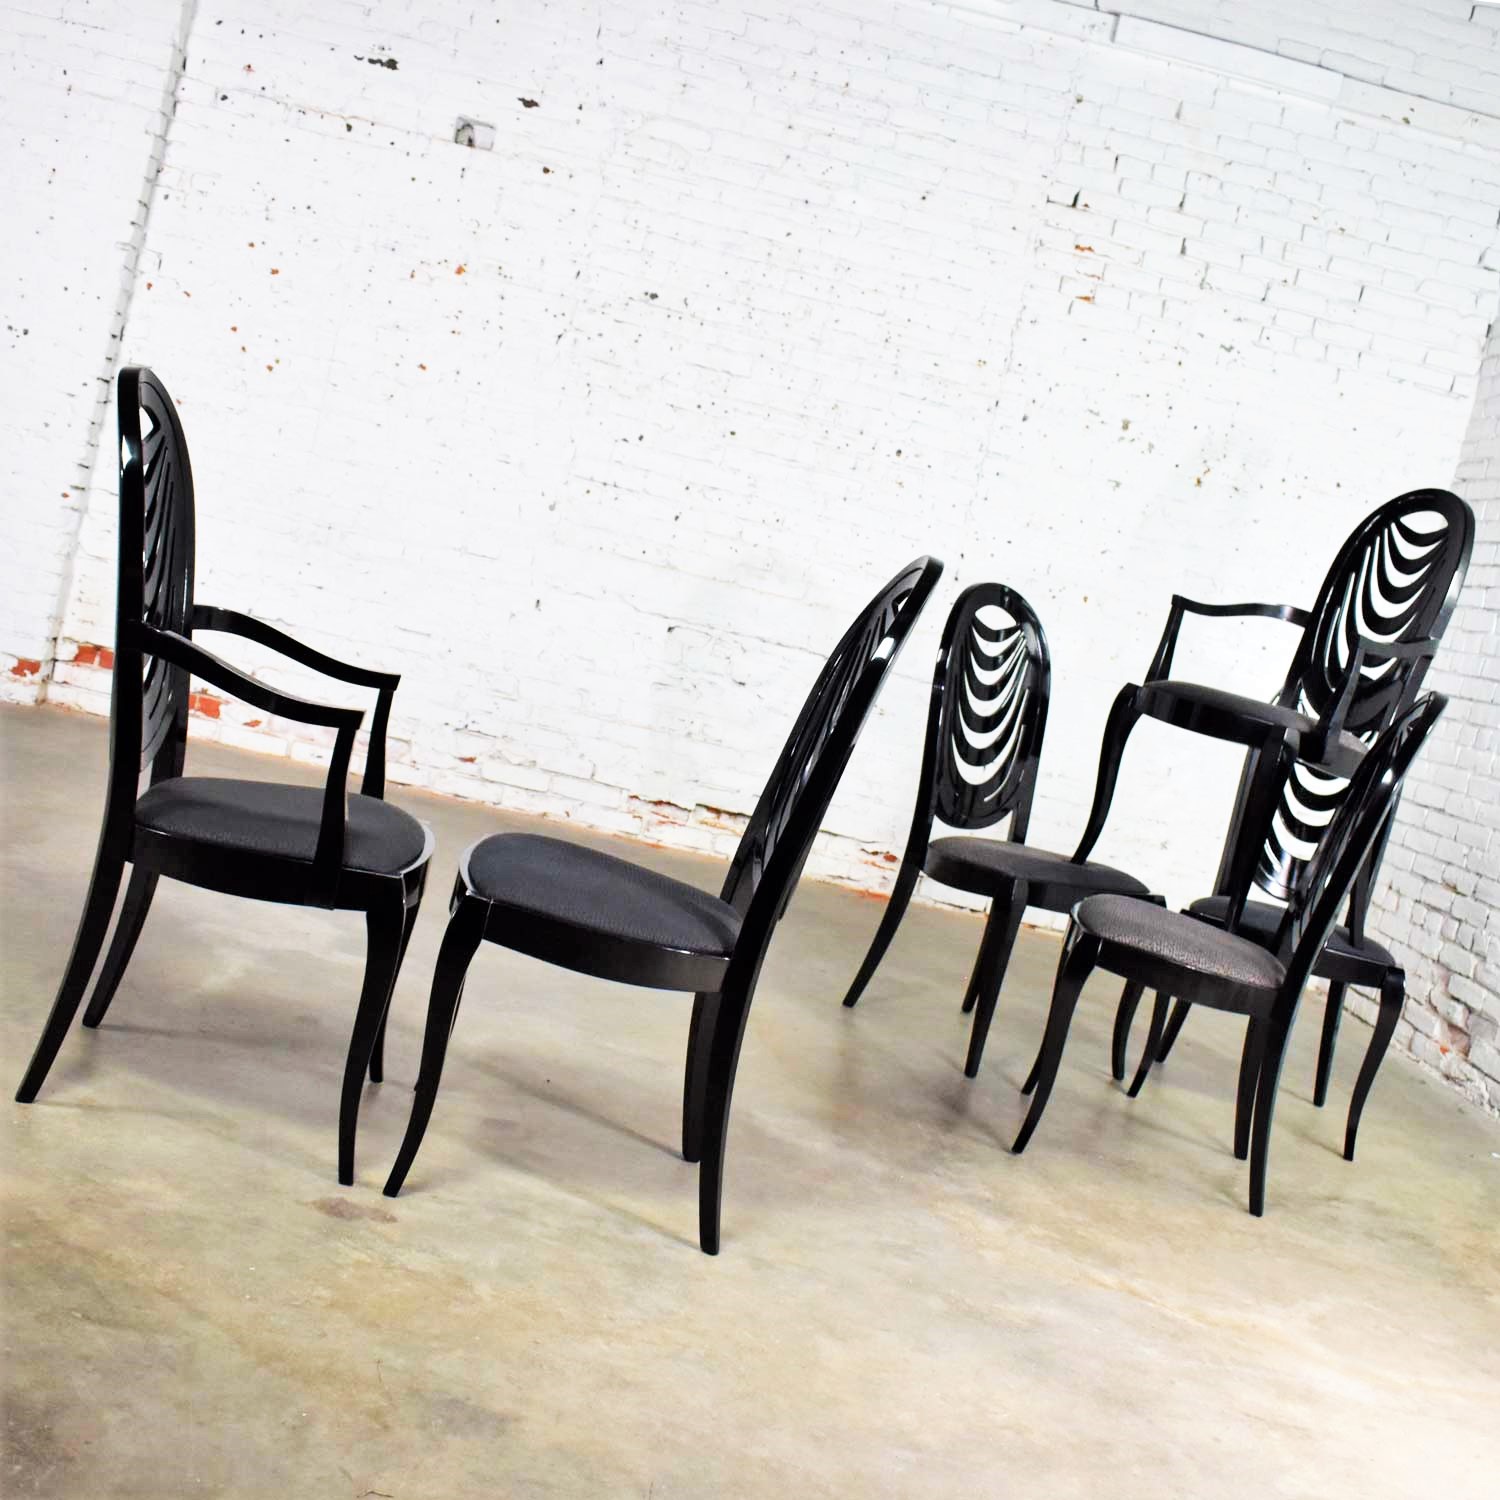 Black Lacquer Oval Drape Back Dining Chairs by Pietro Costantini for Ello Set 6